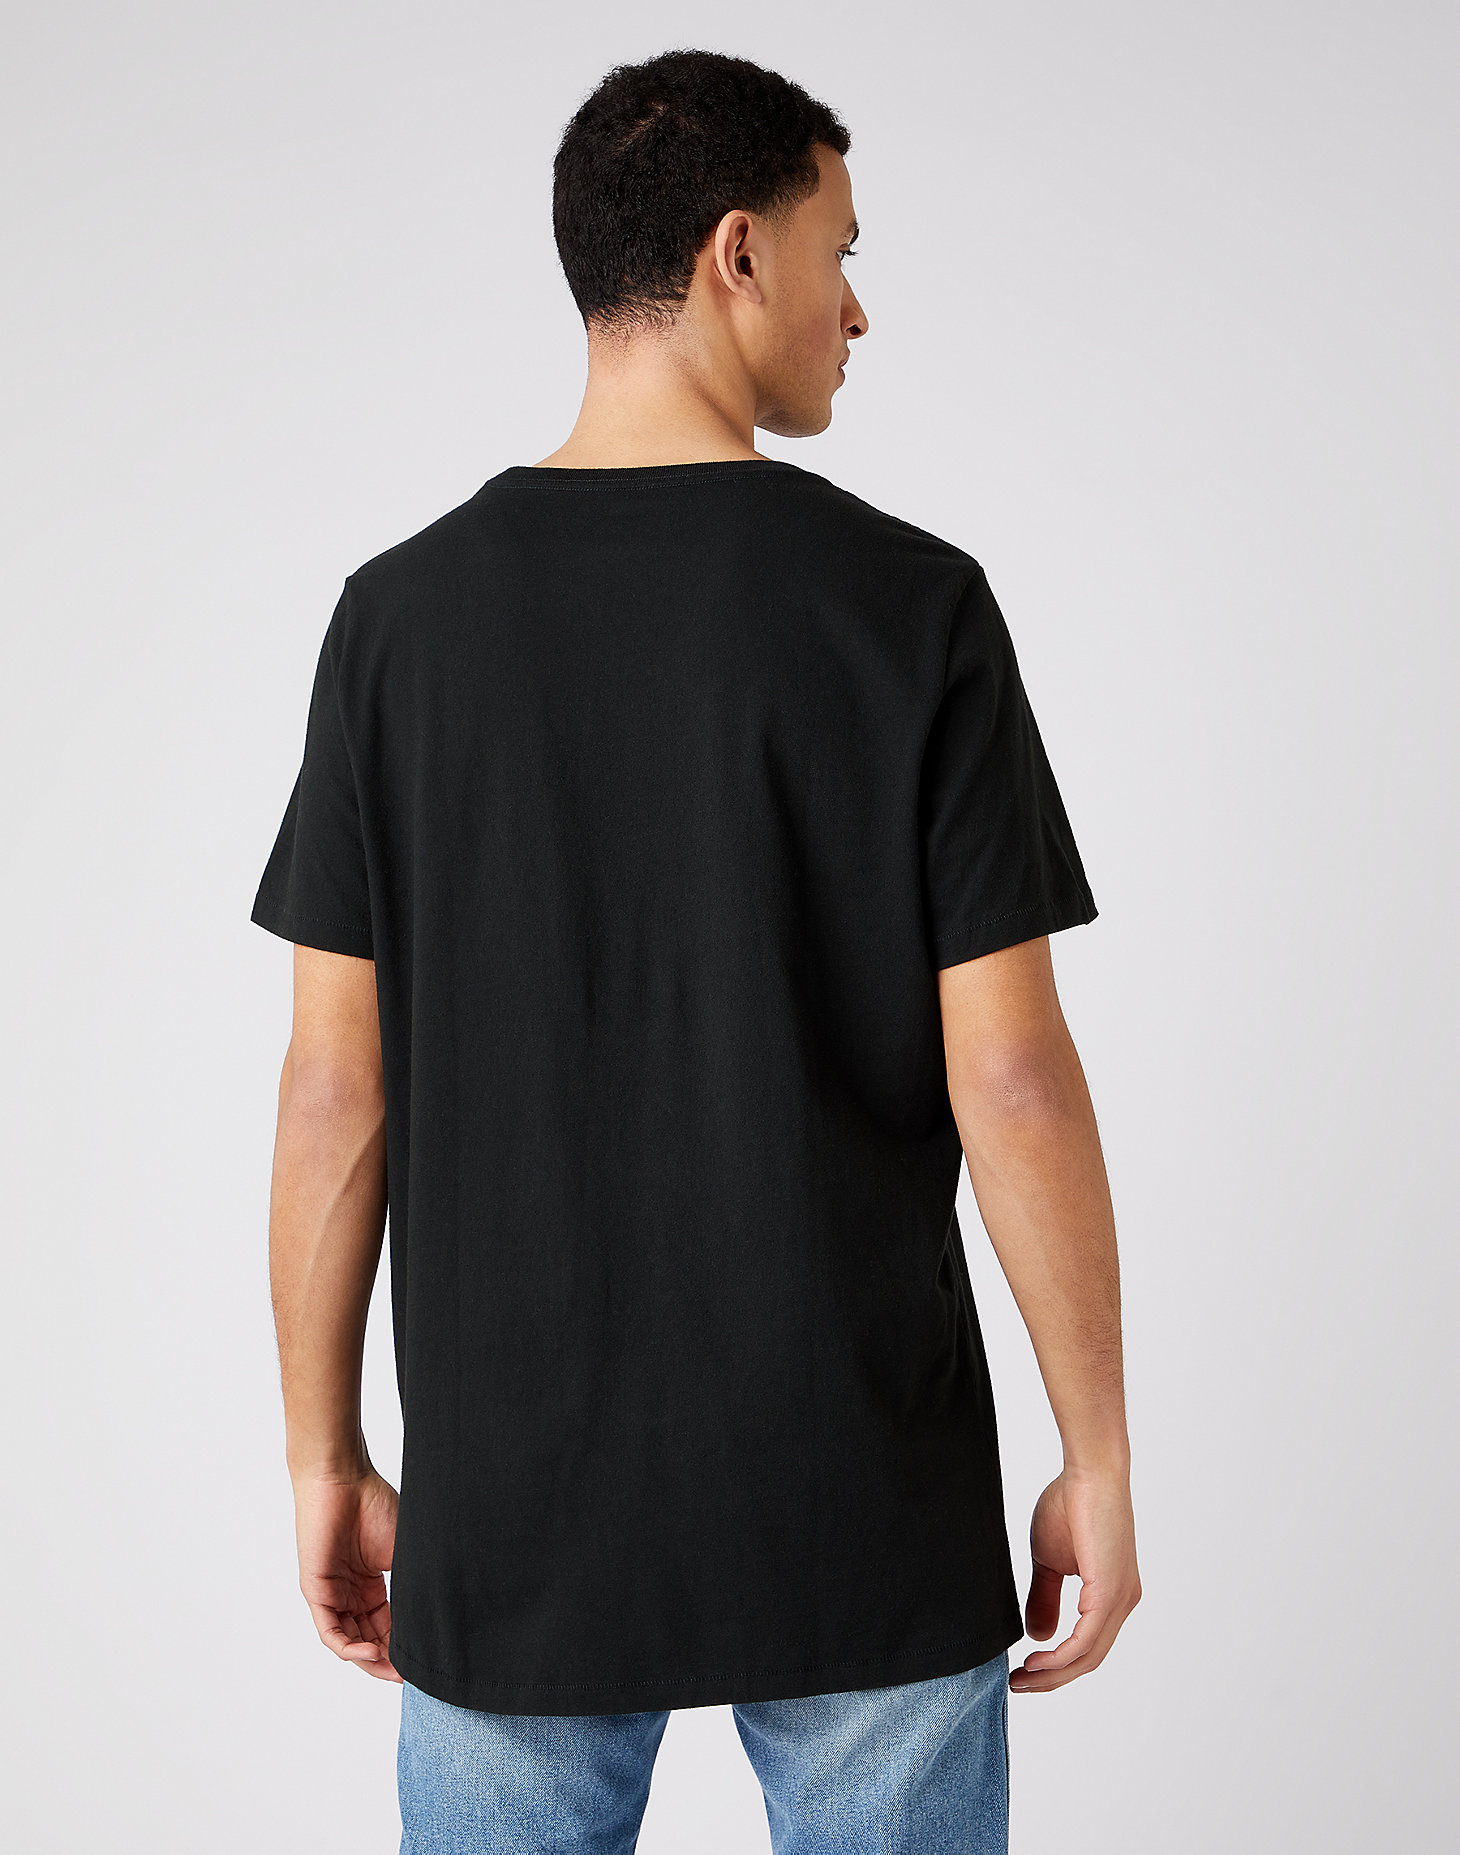 Vibrations Tee in Black alternative view 2